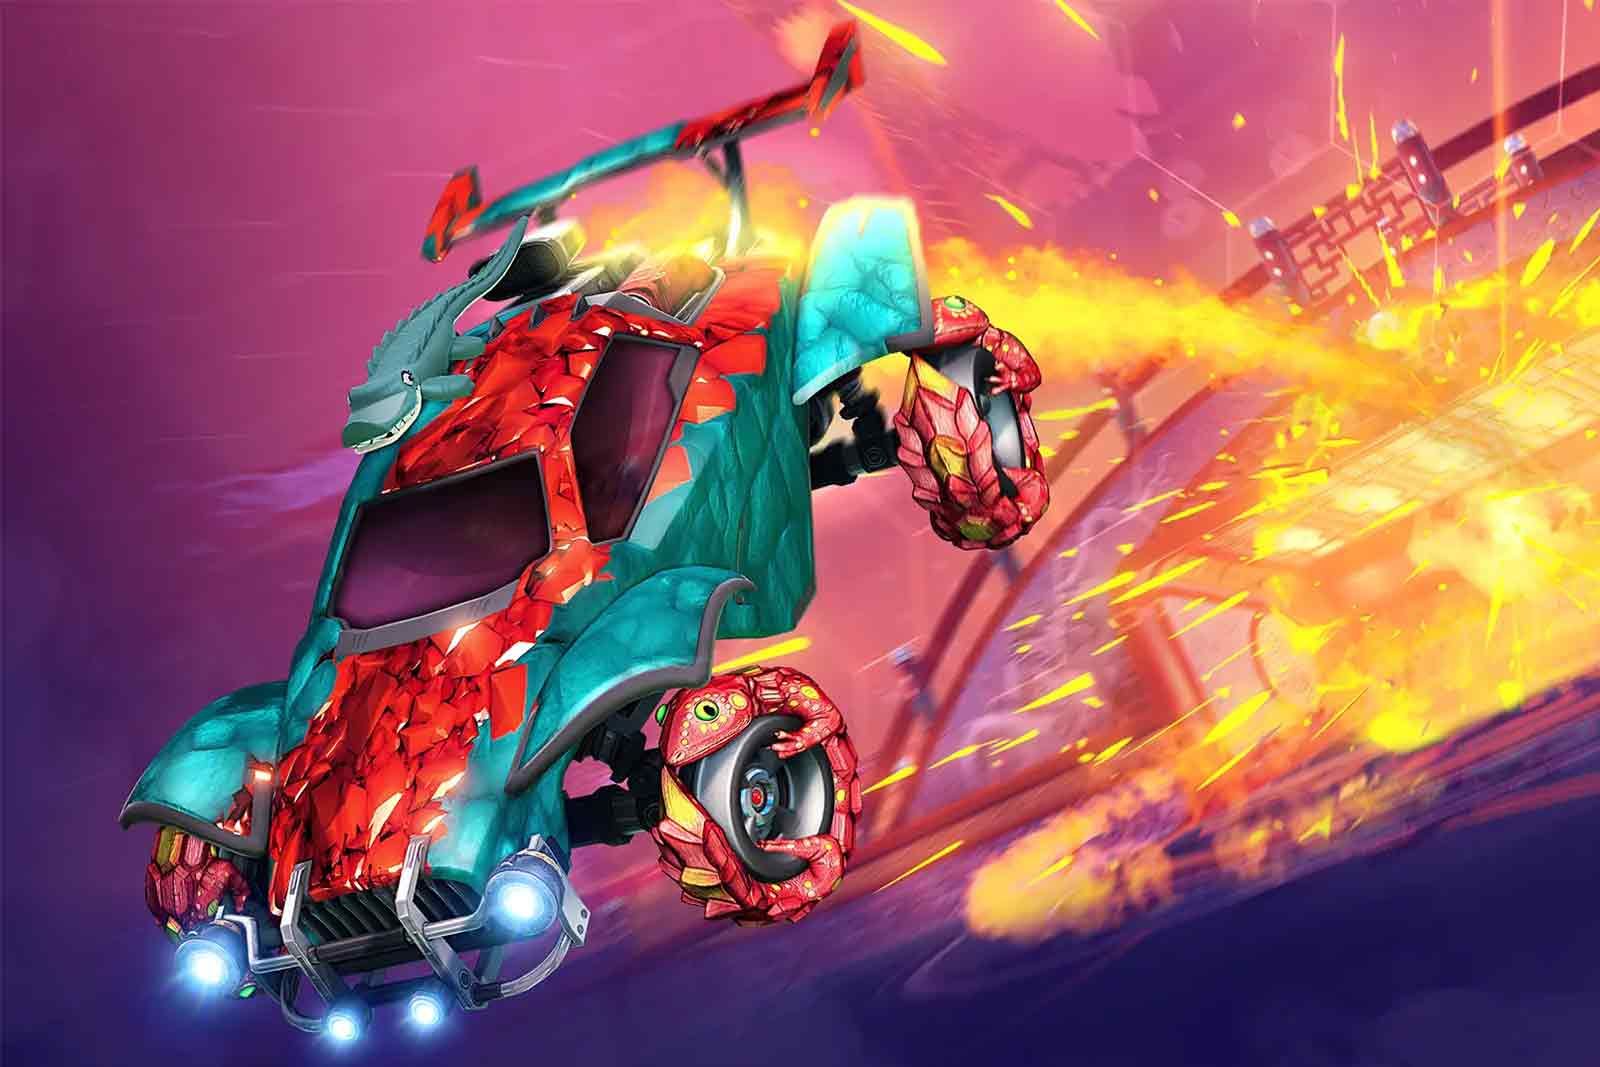 Rocket League tips and tricks: Get better with these hints for beginners